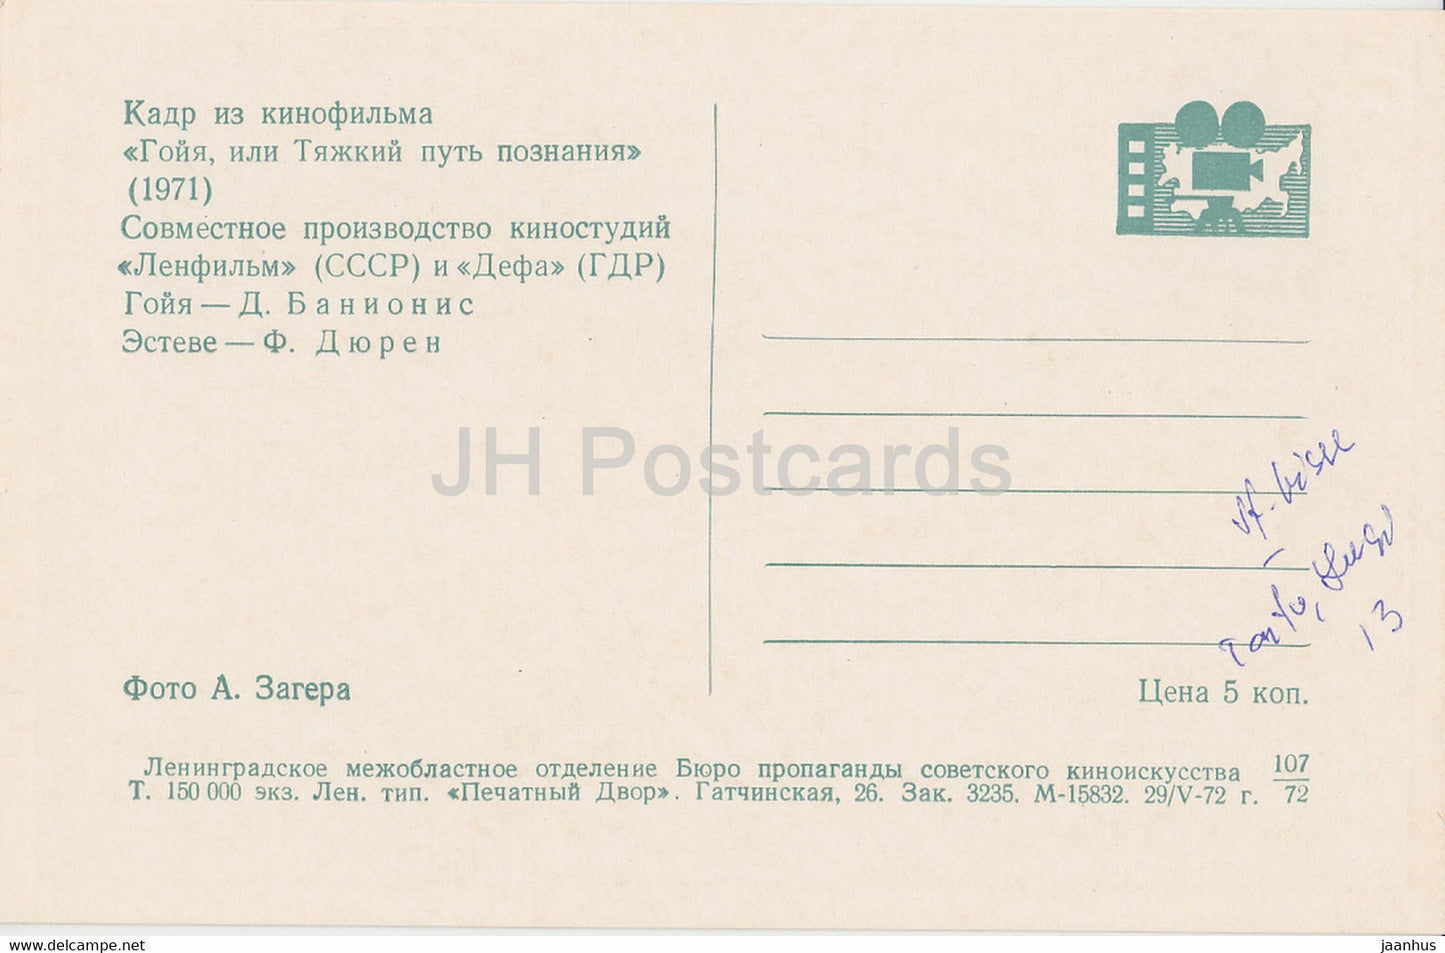 Goya or the Hard Way to Enlightenment - actor D. Banionis - 1 - Movie - Film - soviet - 1972 - Russia USSR - unused